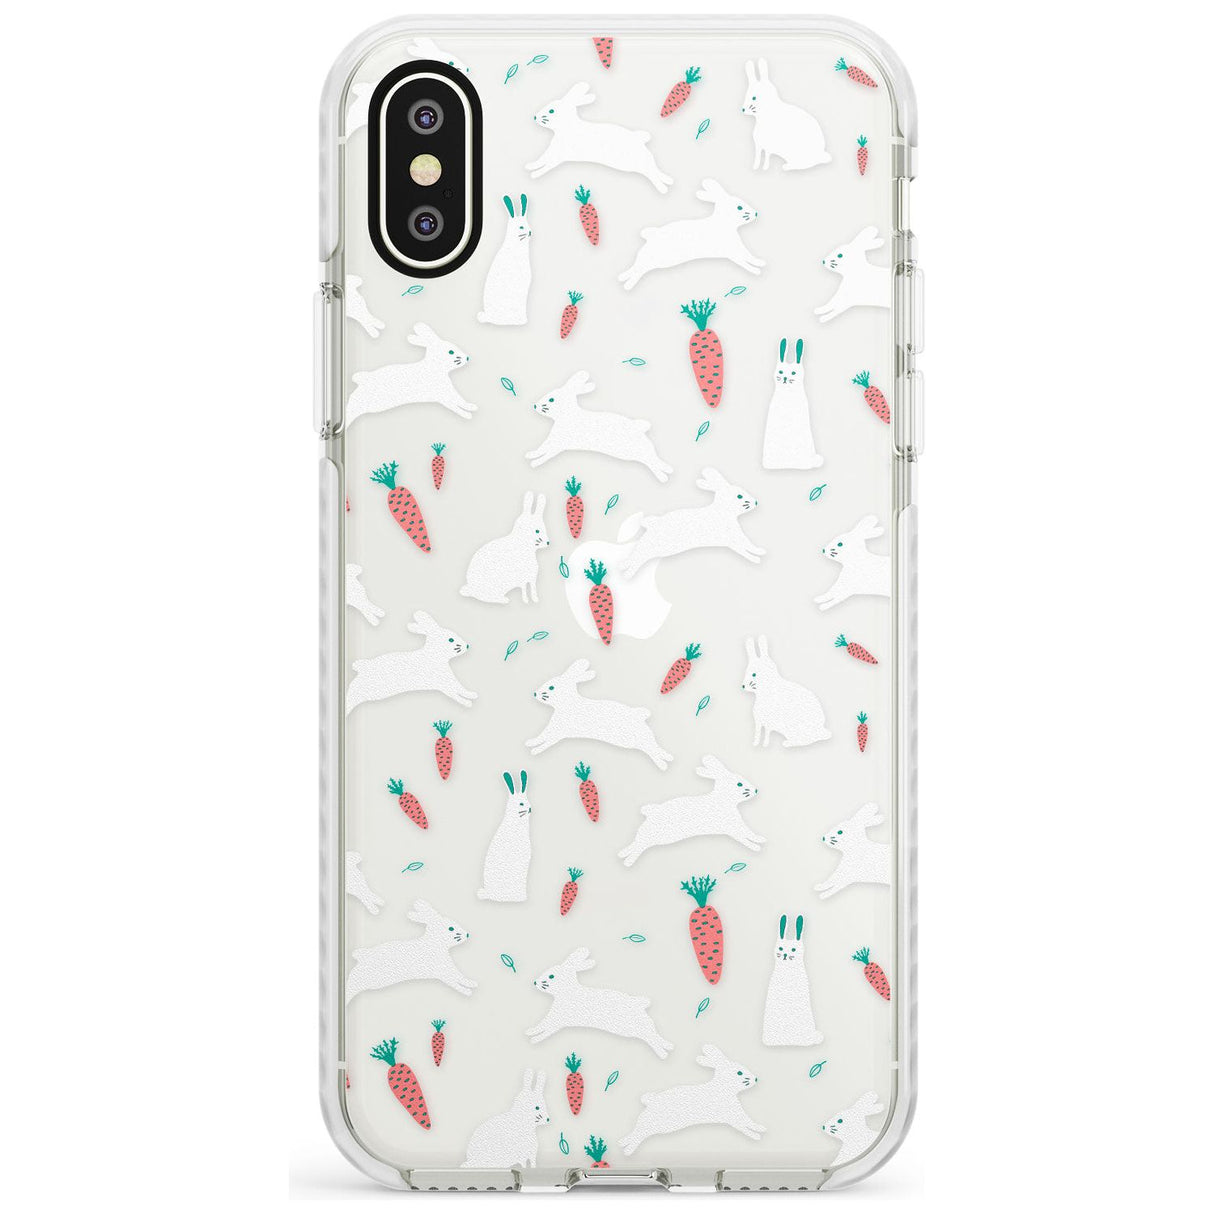 White Bunnies and Carrots Impact Phone Case for iPhone X XS Max XR